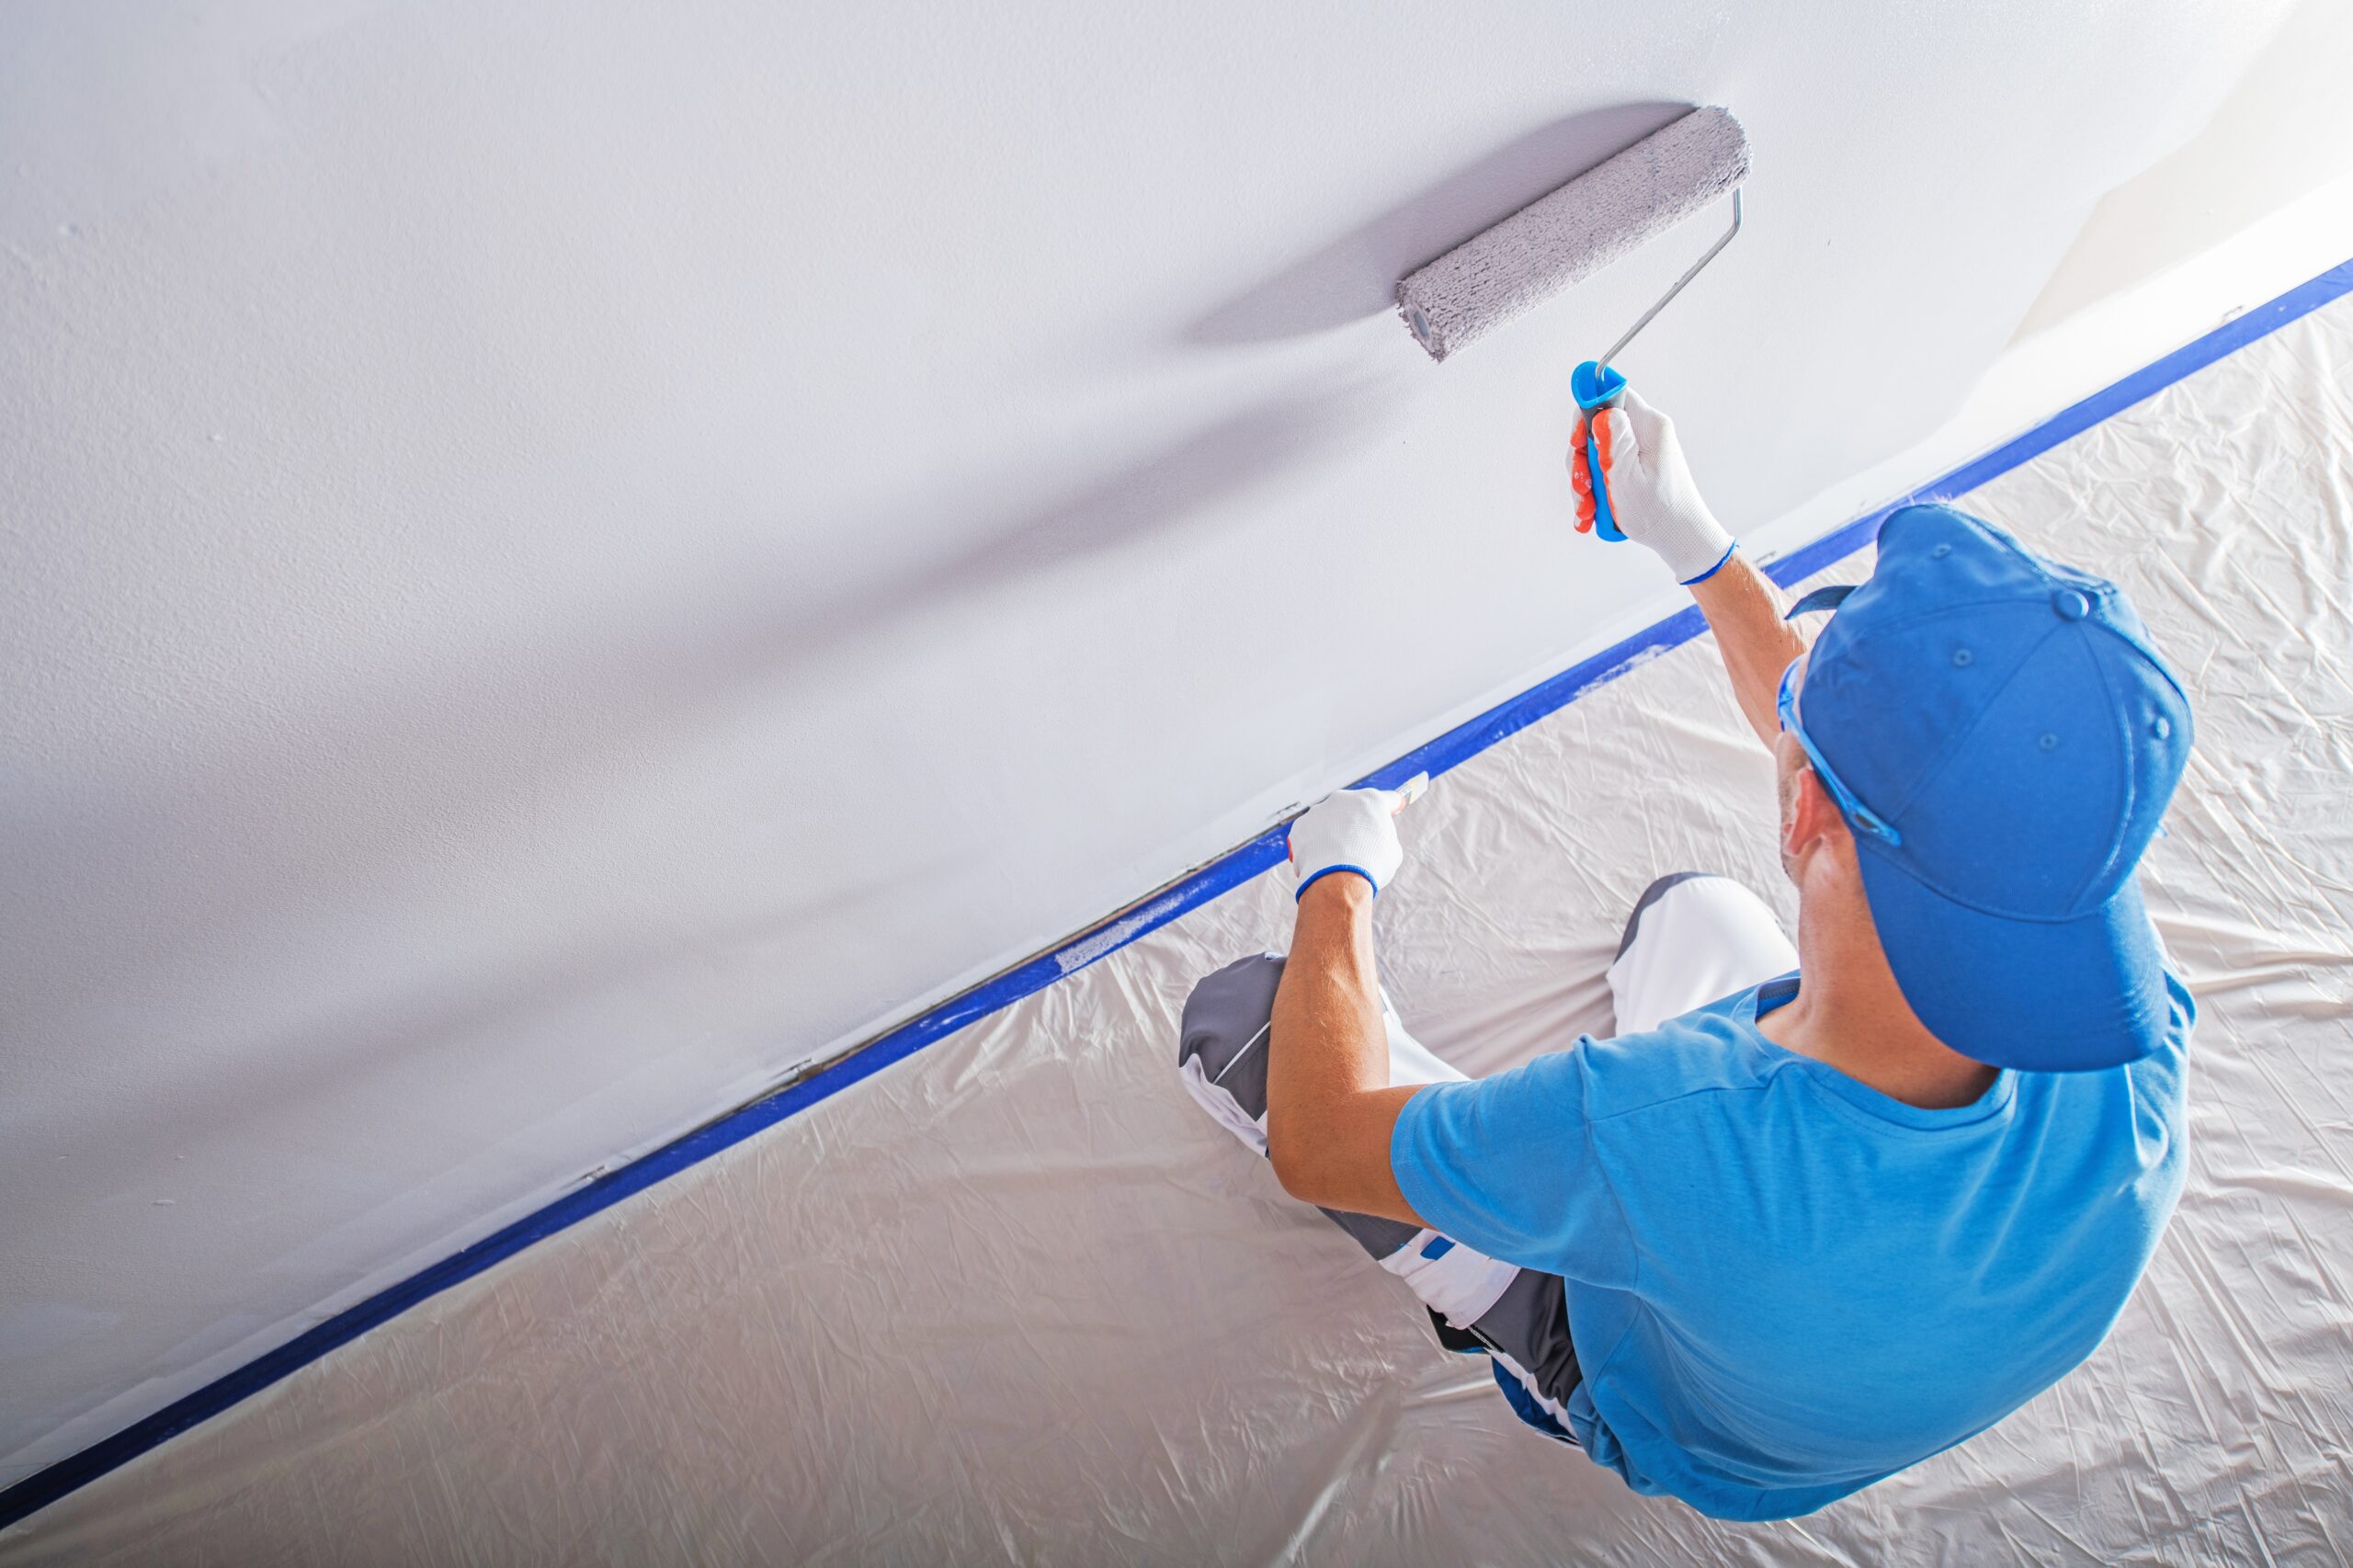 Paramount Painters, LLC is based in York, PA and serves the South Central Pennsylvania and Northern Maryland market for interior, exterior, and commercial painting services.